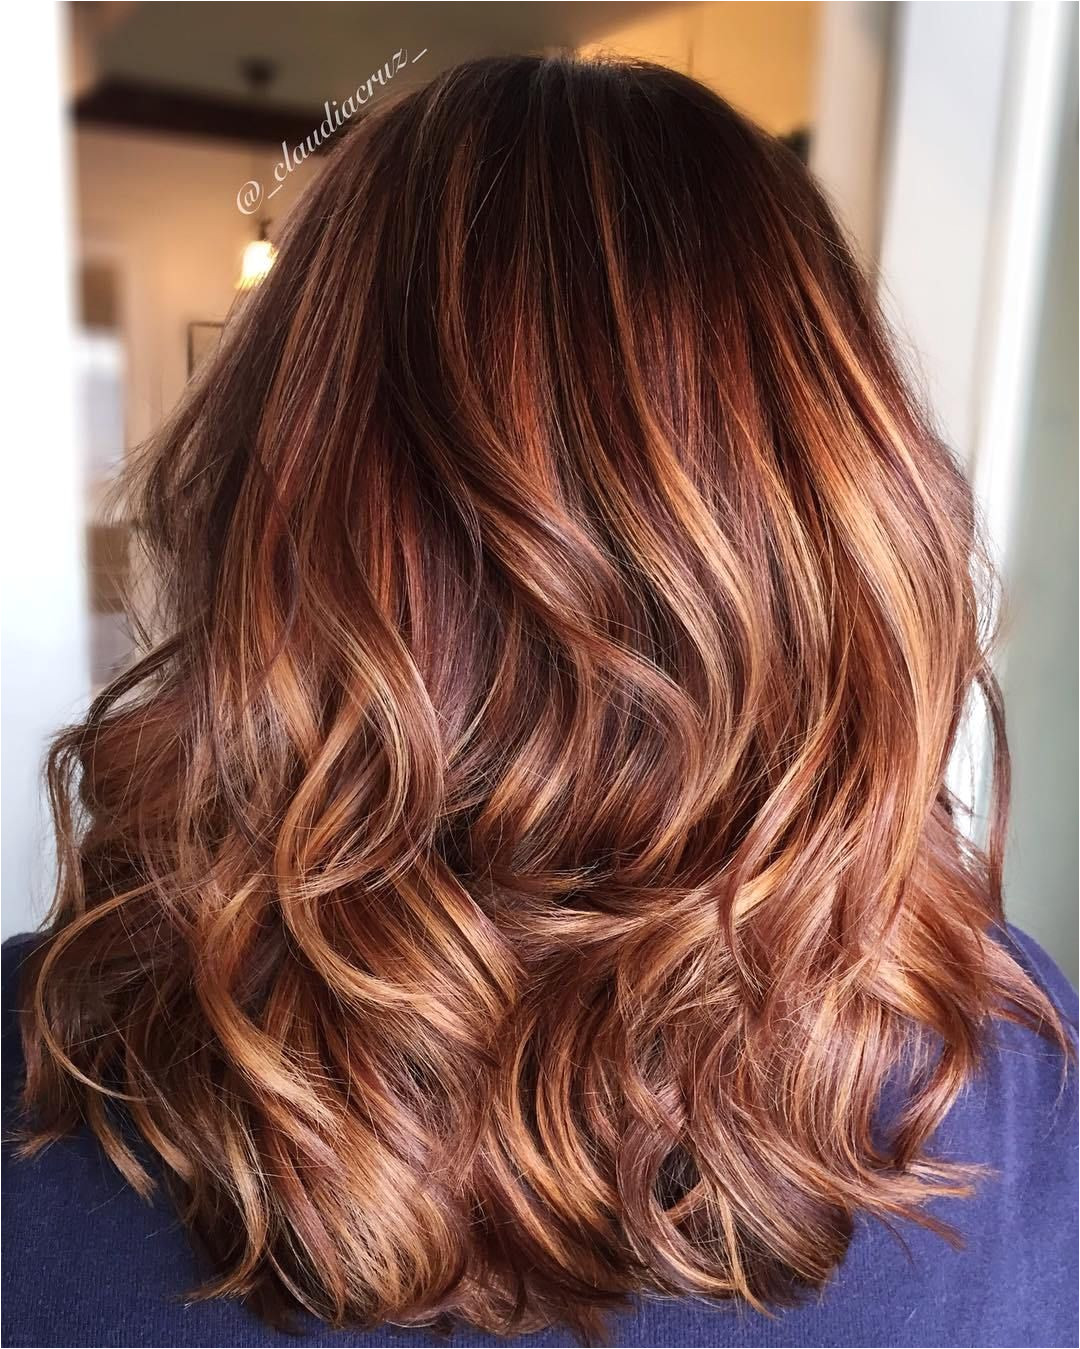 Hairstyles Copper Highlights 40 Fresh Trendy Ideas for Copper Hair Color Hair